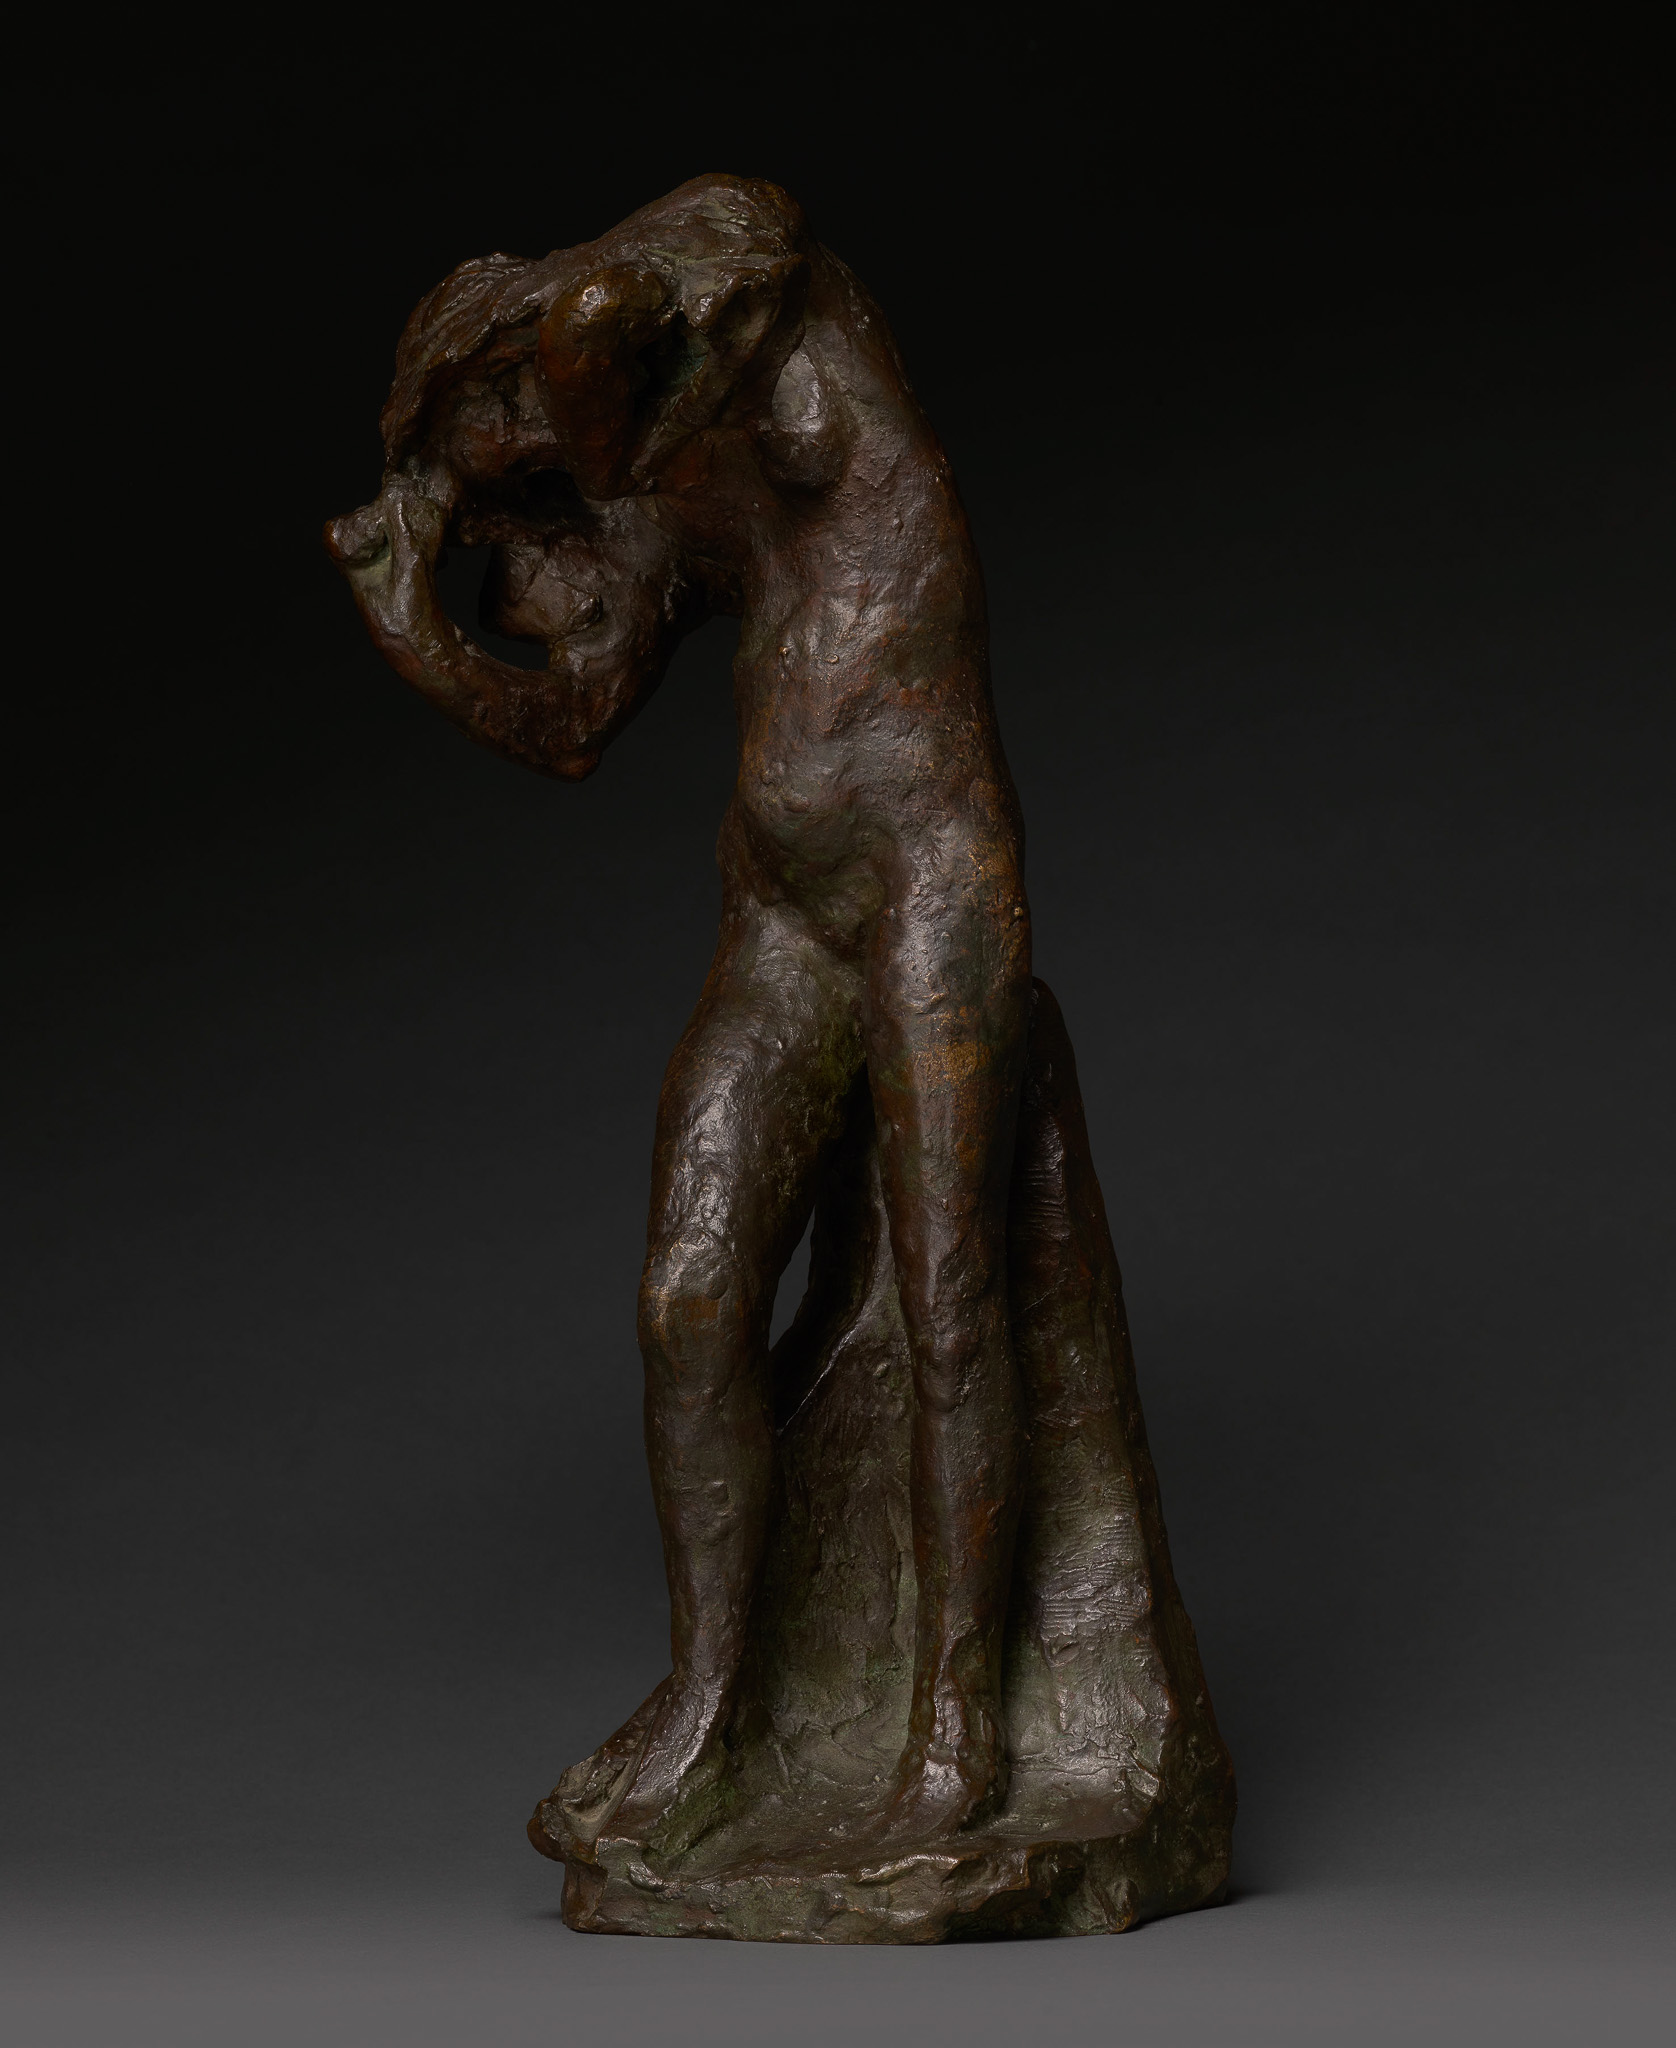 The Wick - AUGUSTE RODIN
A bather removing her shirt, c.1899-1900

Bronze
39.5 cm
